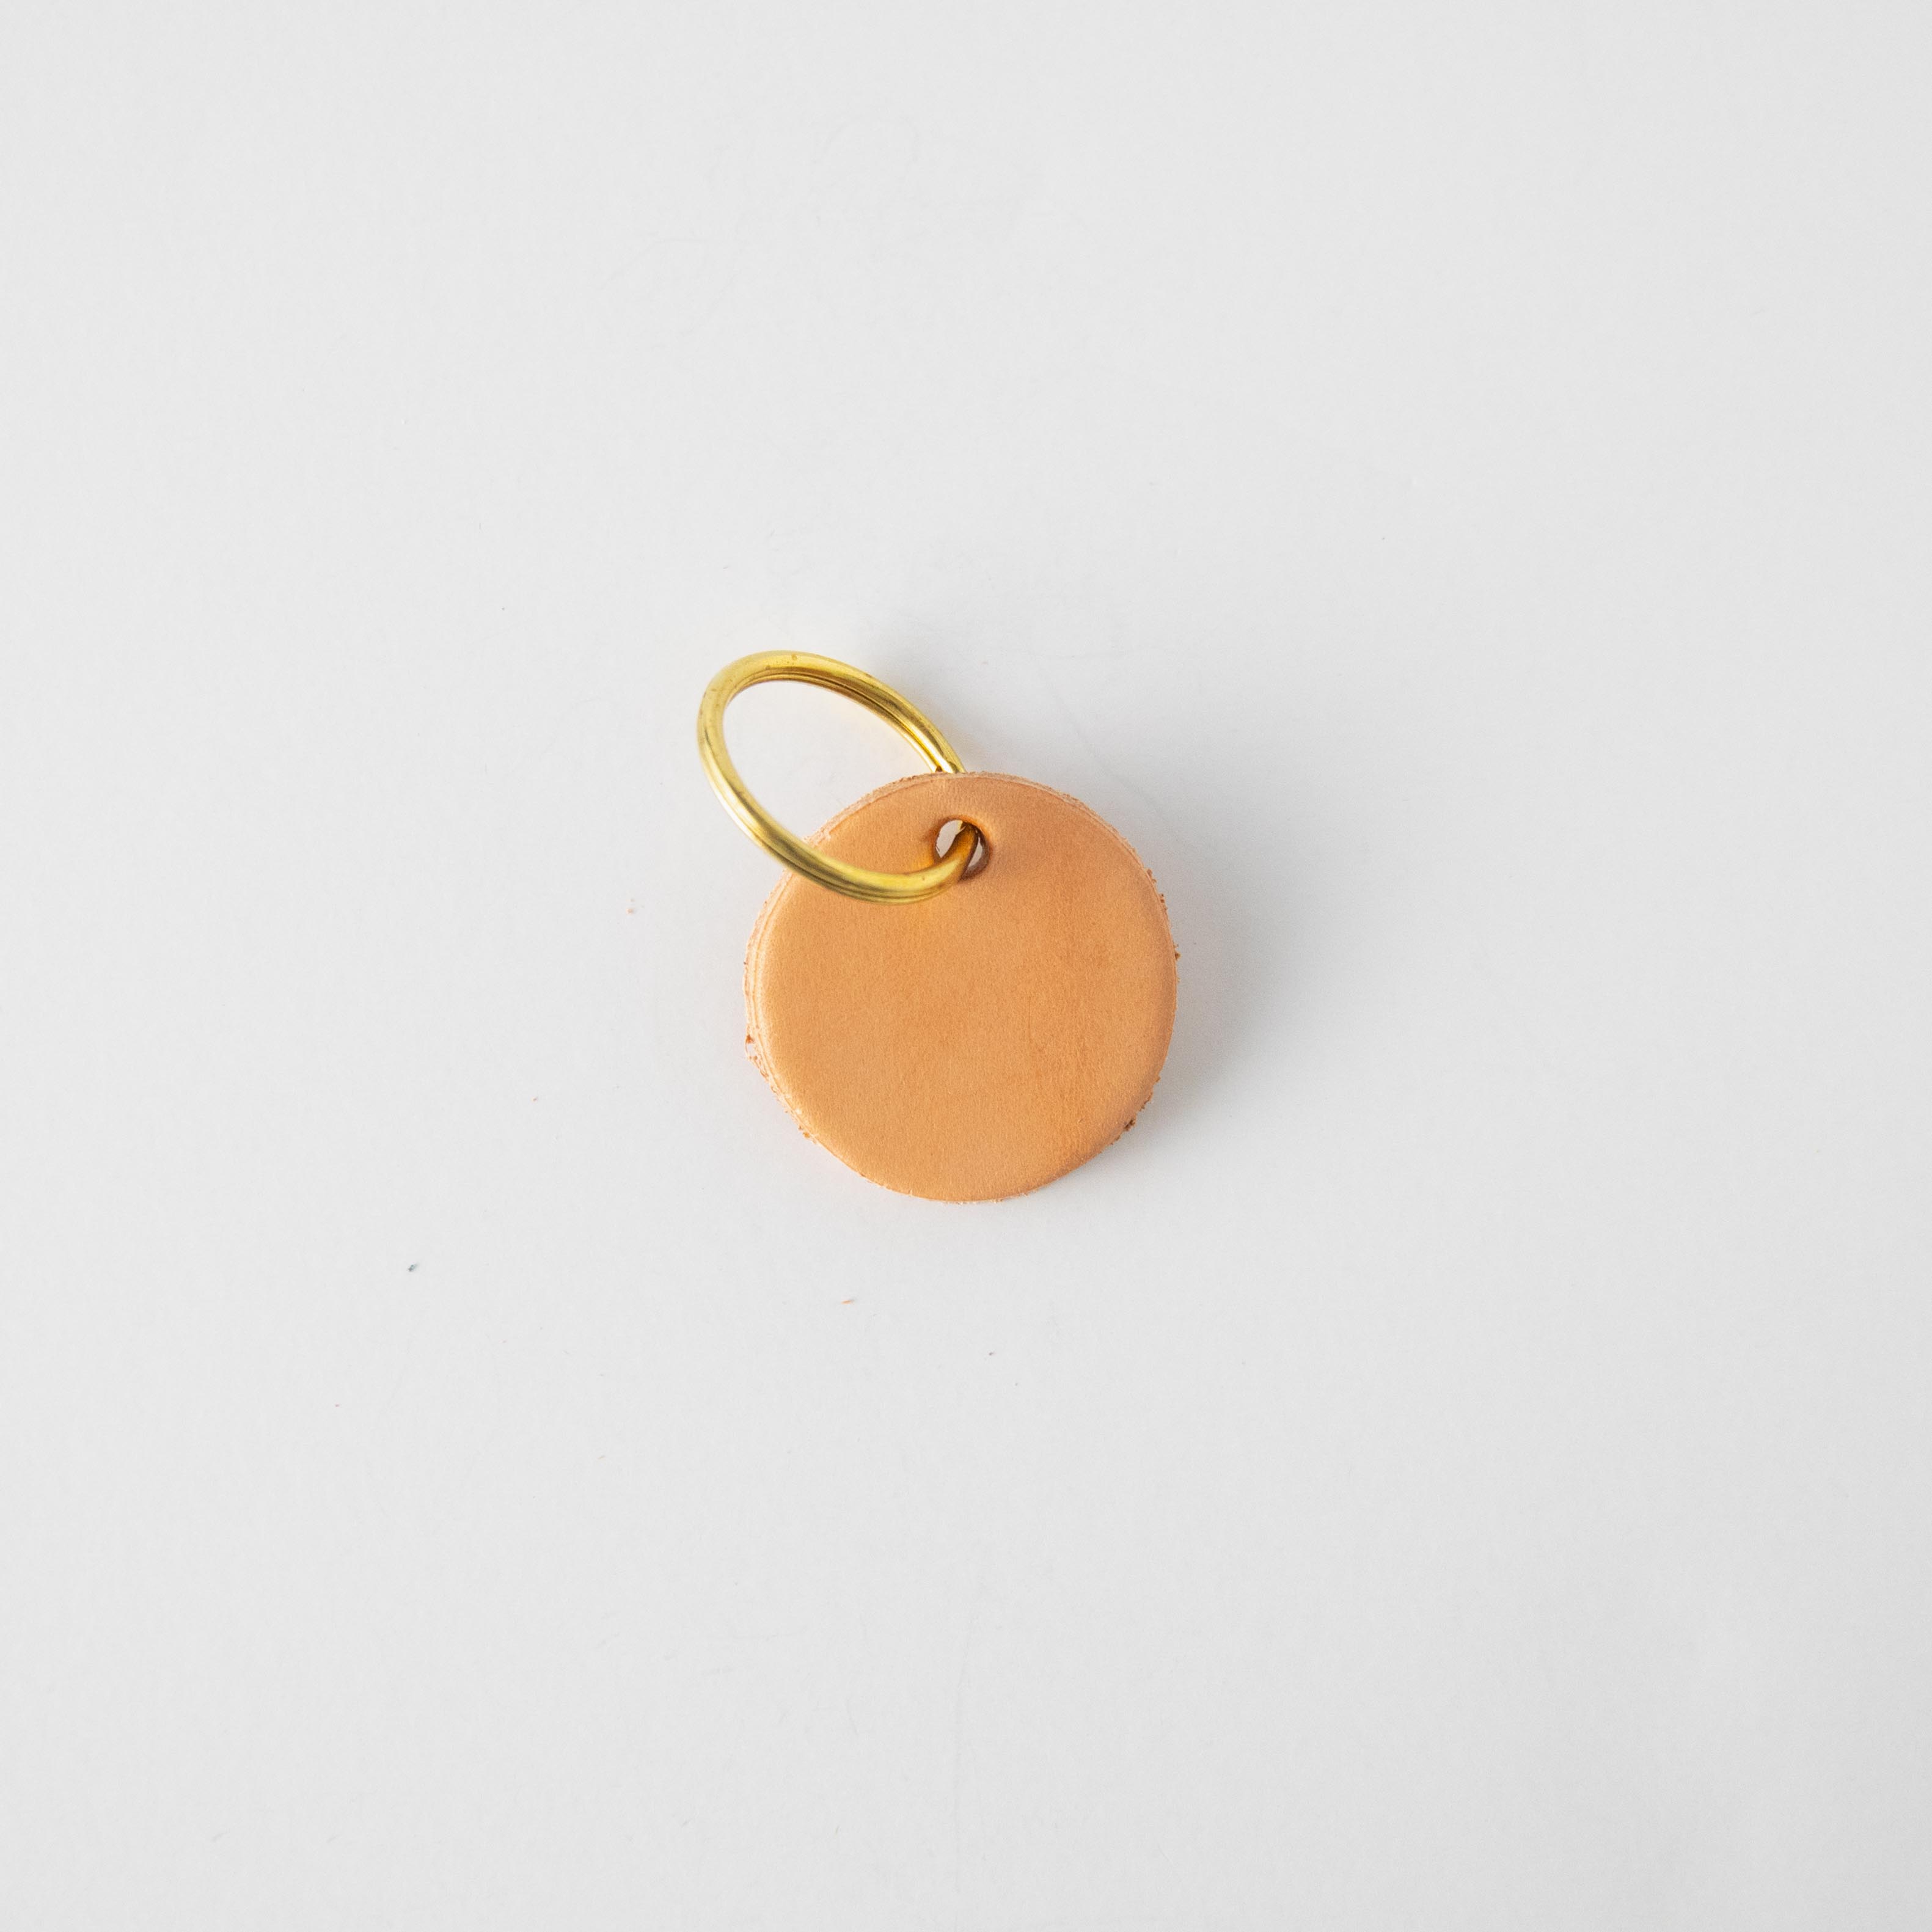 Vegetable Tanned Circle Key Fob- leather keychain - leather key holder - leather key fob - KMM &amp; Co.